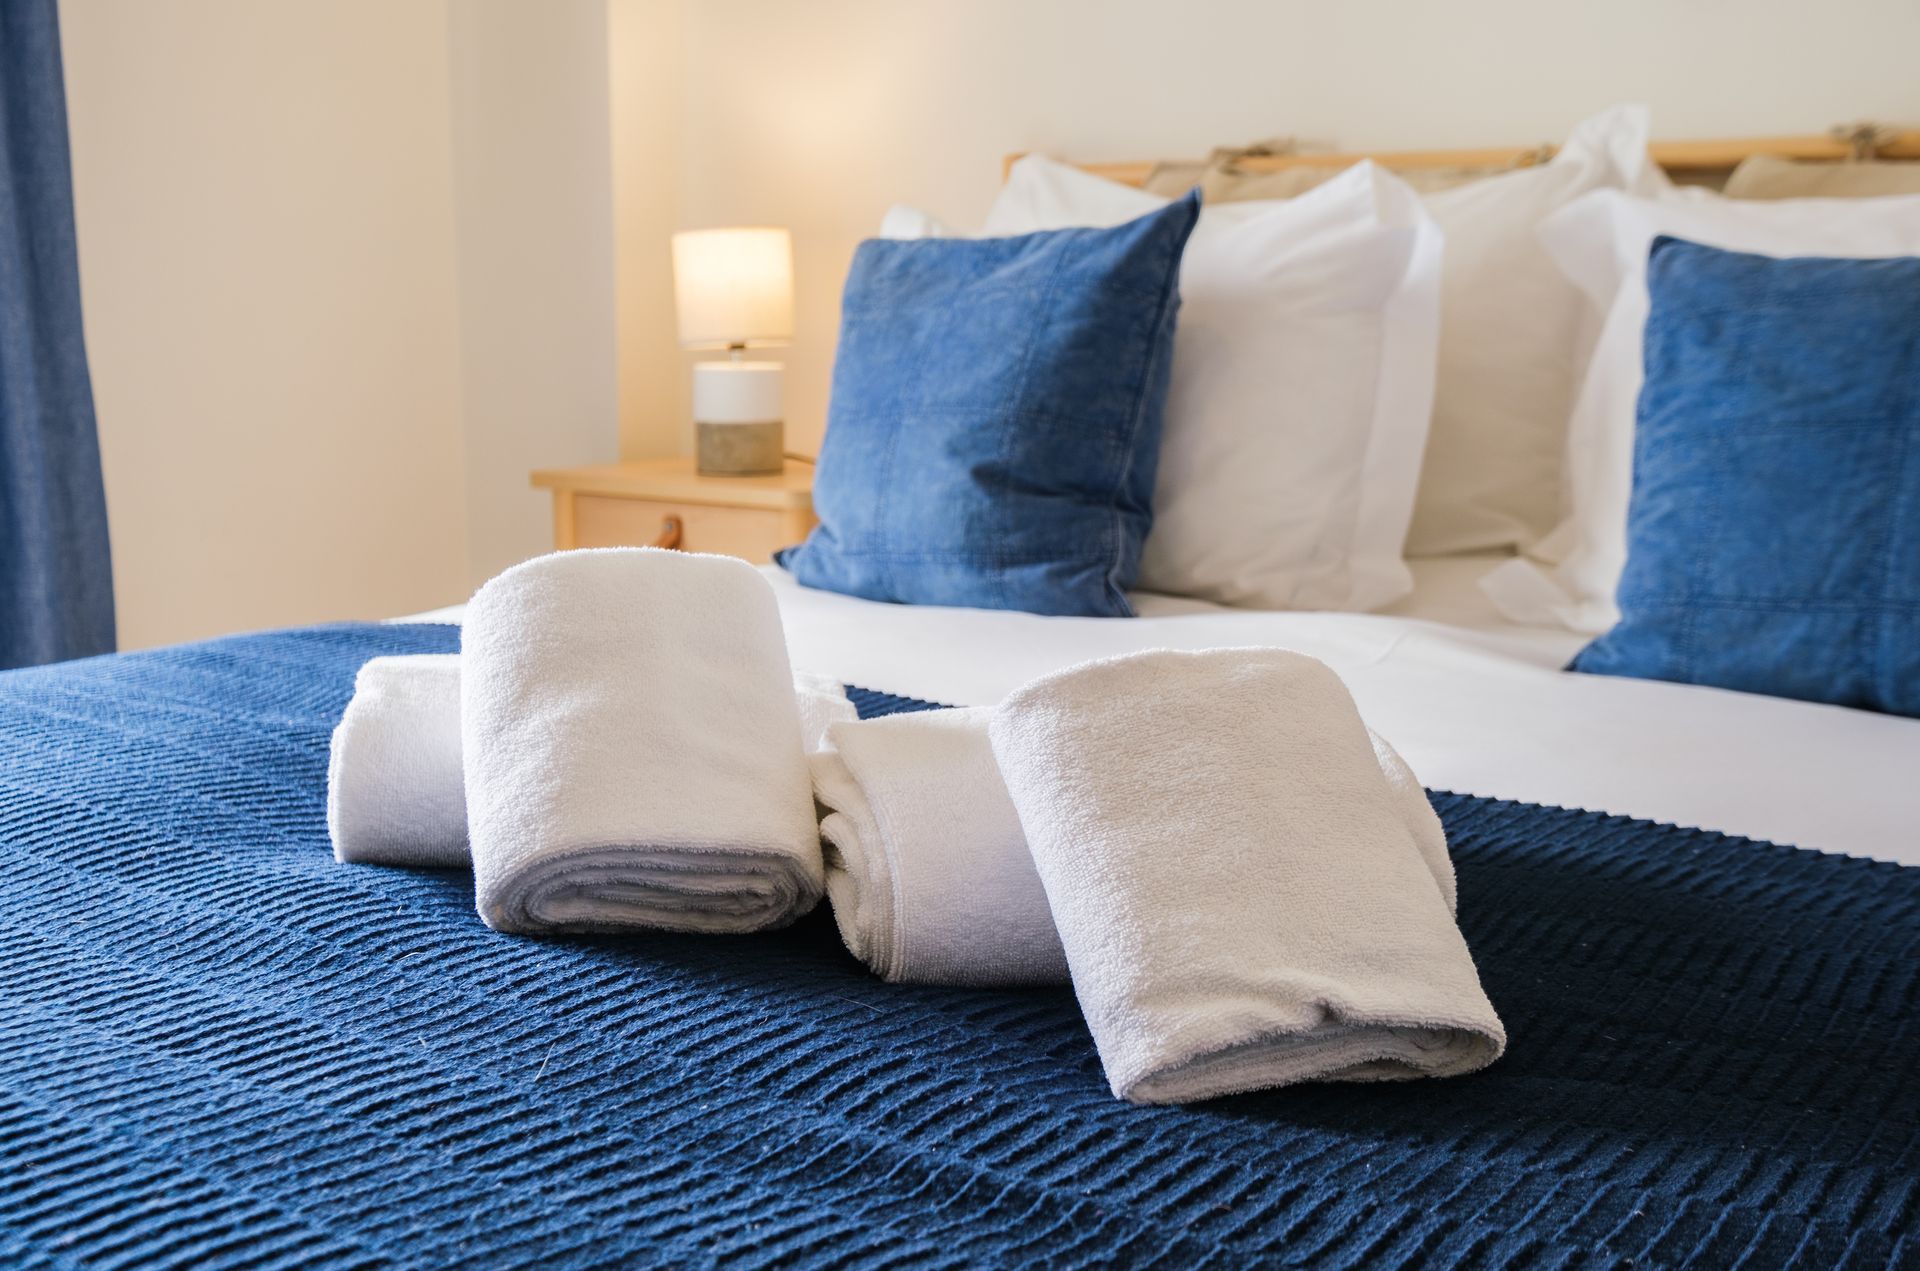 A bed with blue and white pillows and towels on it.